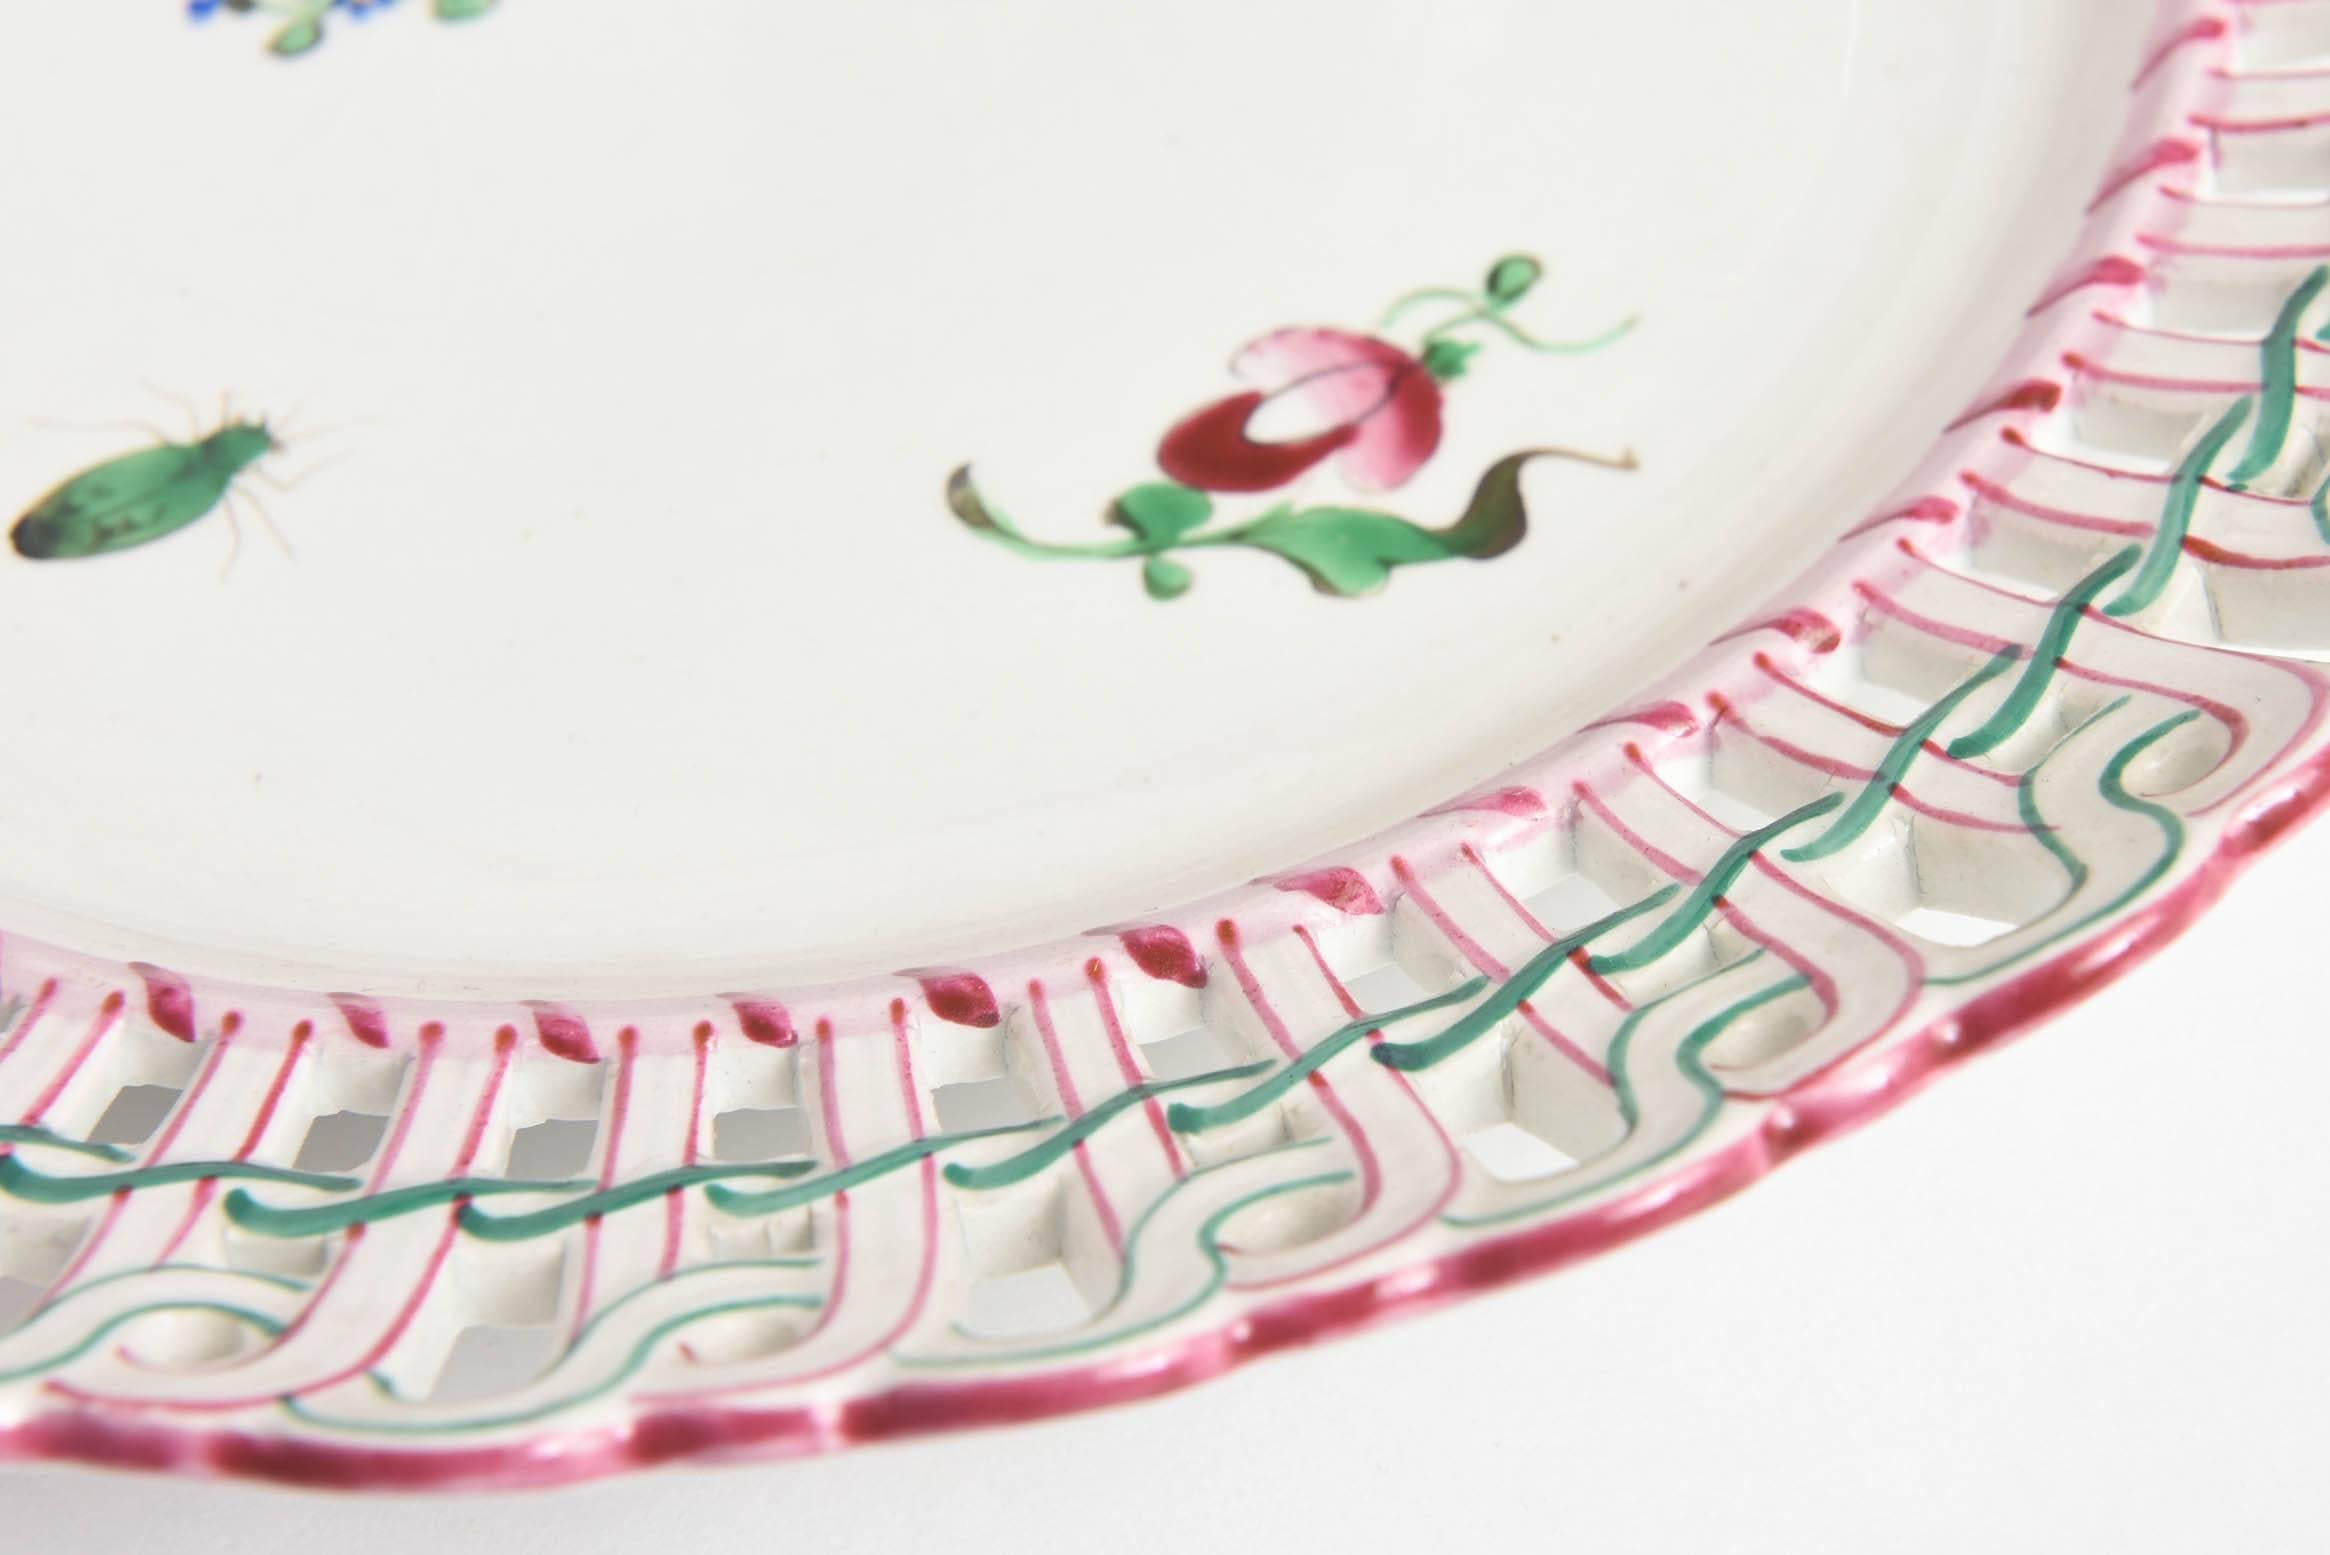 12 Luneville, France Reticulated Hand-Painted Plates, Rare Pink Green Collars 2